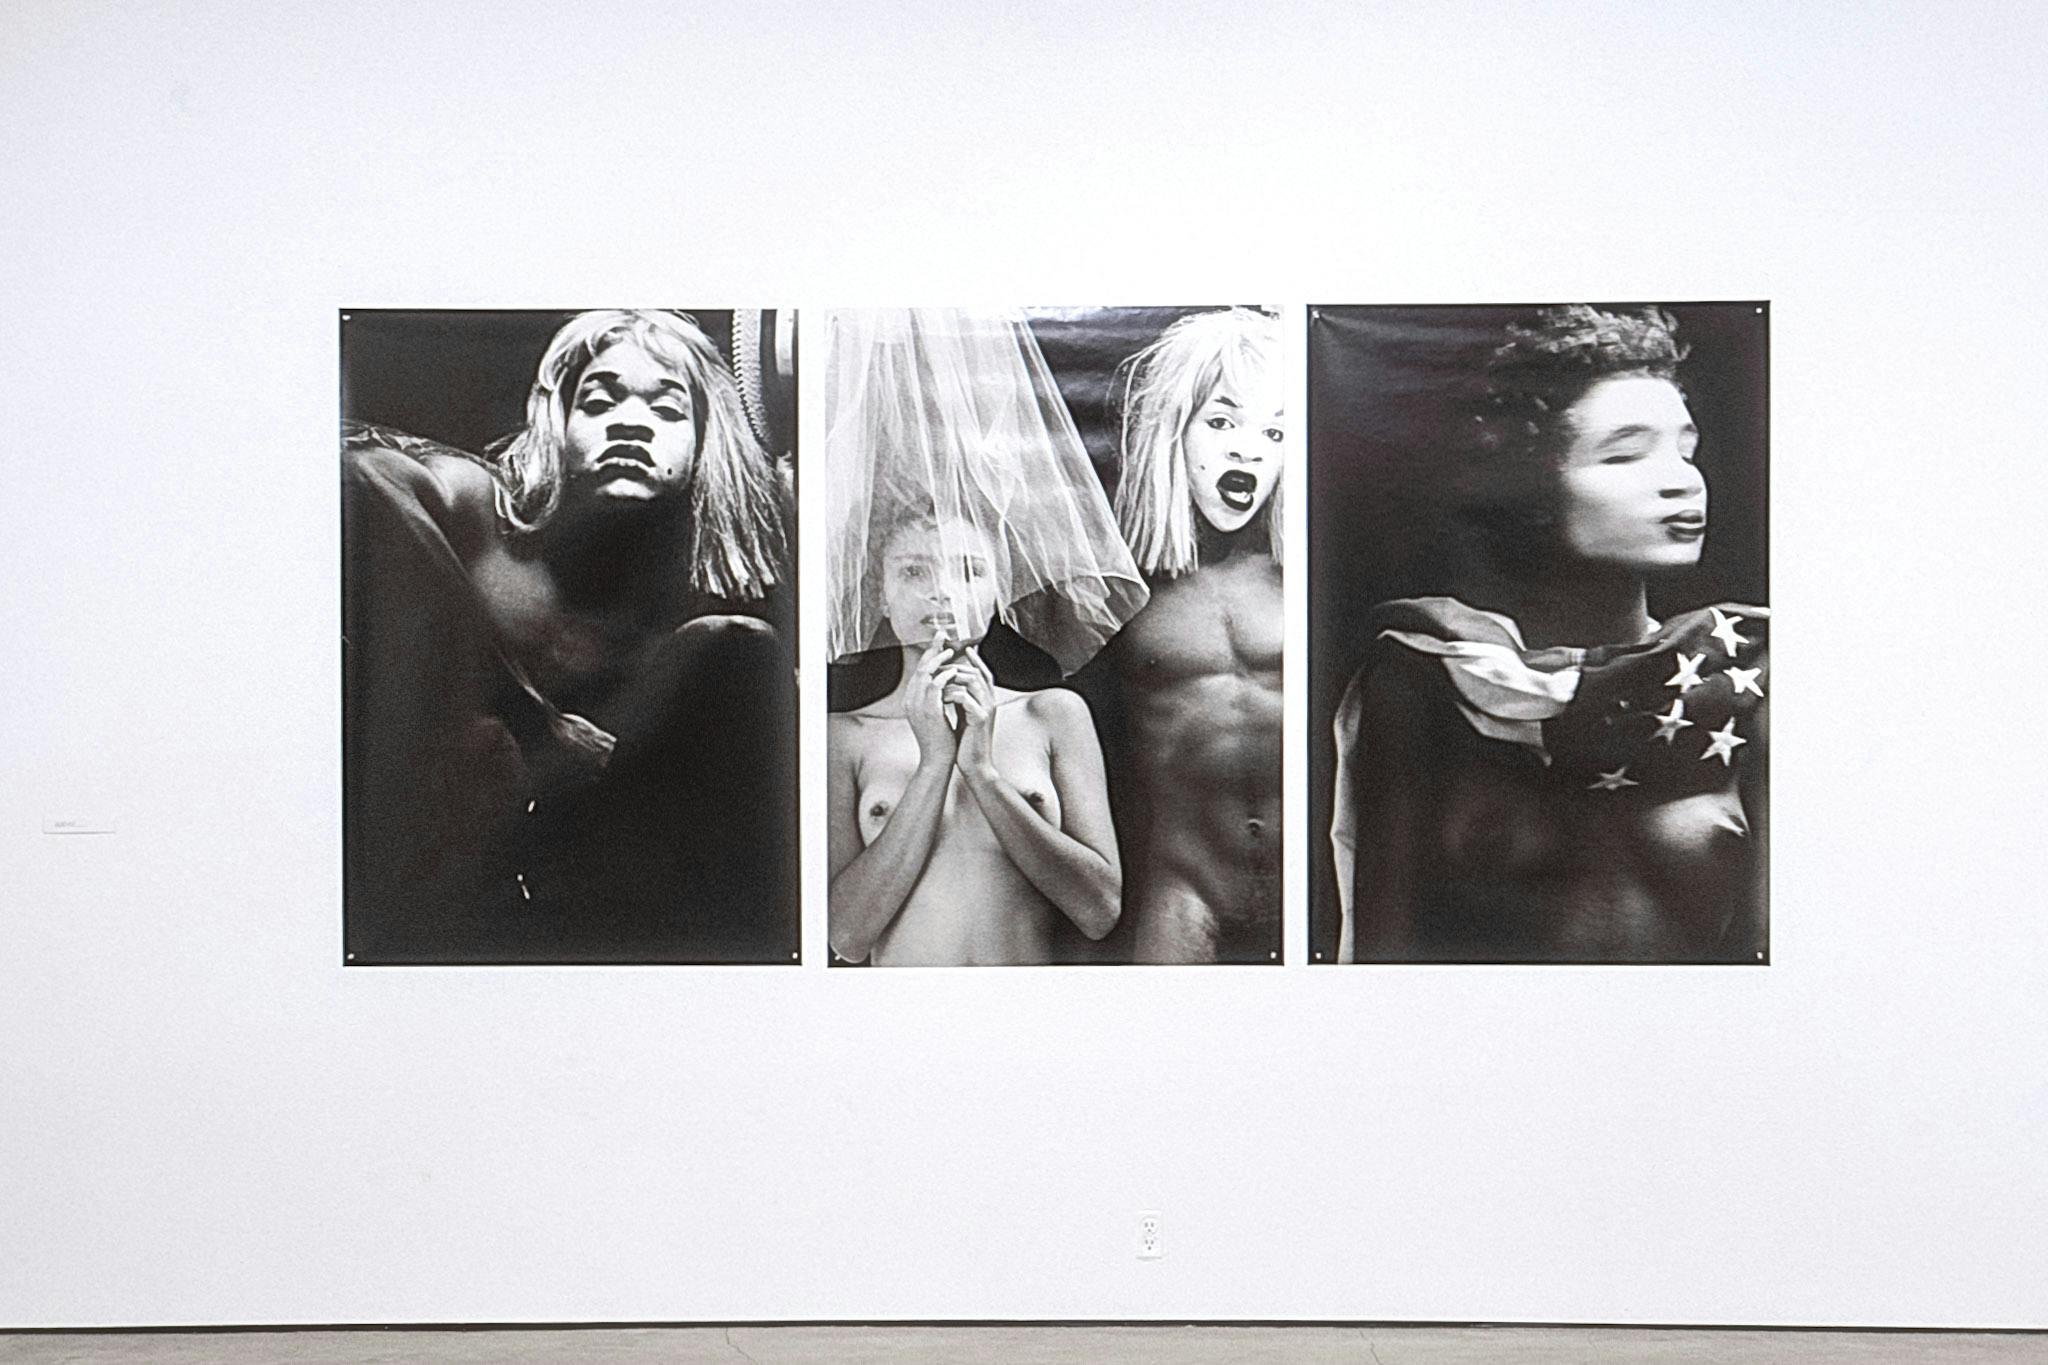 Three large photos on a gallery wall. The photos are black and white and show semi-nude people in drag or costume. The photos are printed on glossy paper and pinned to the wall.